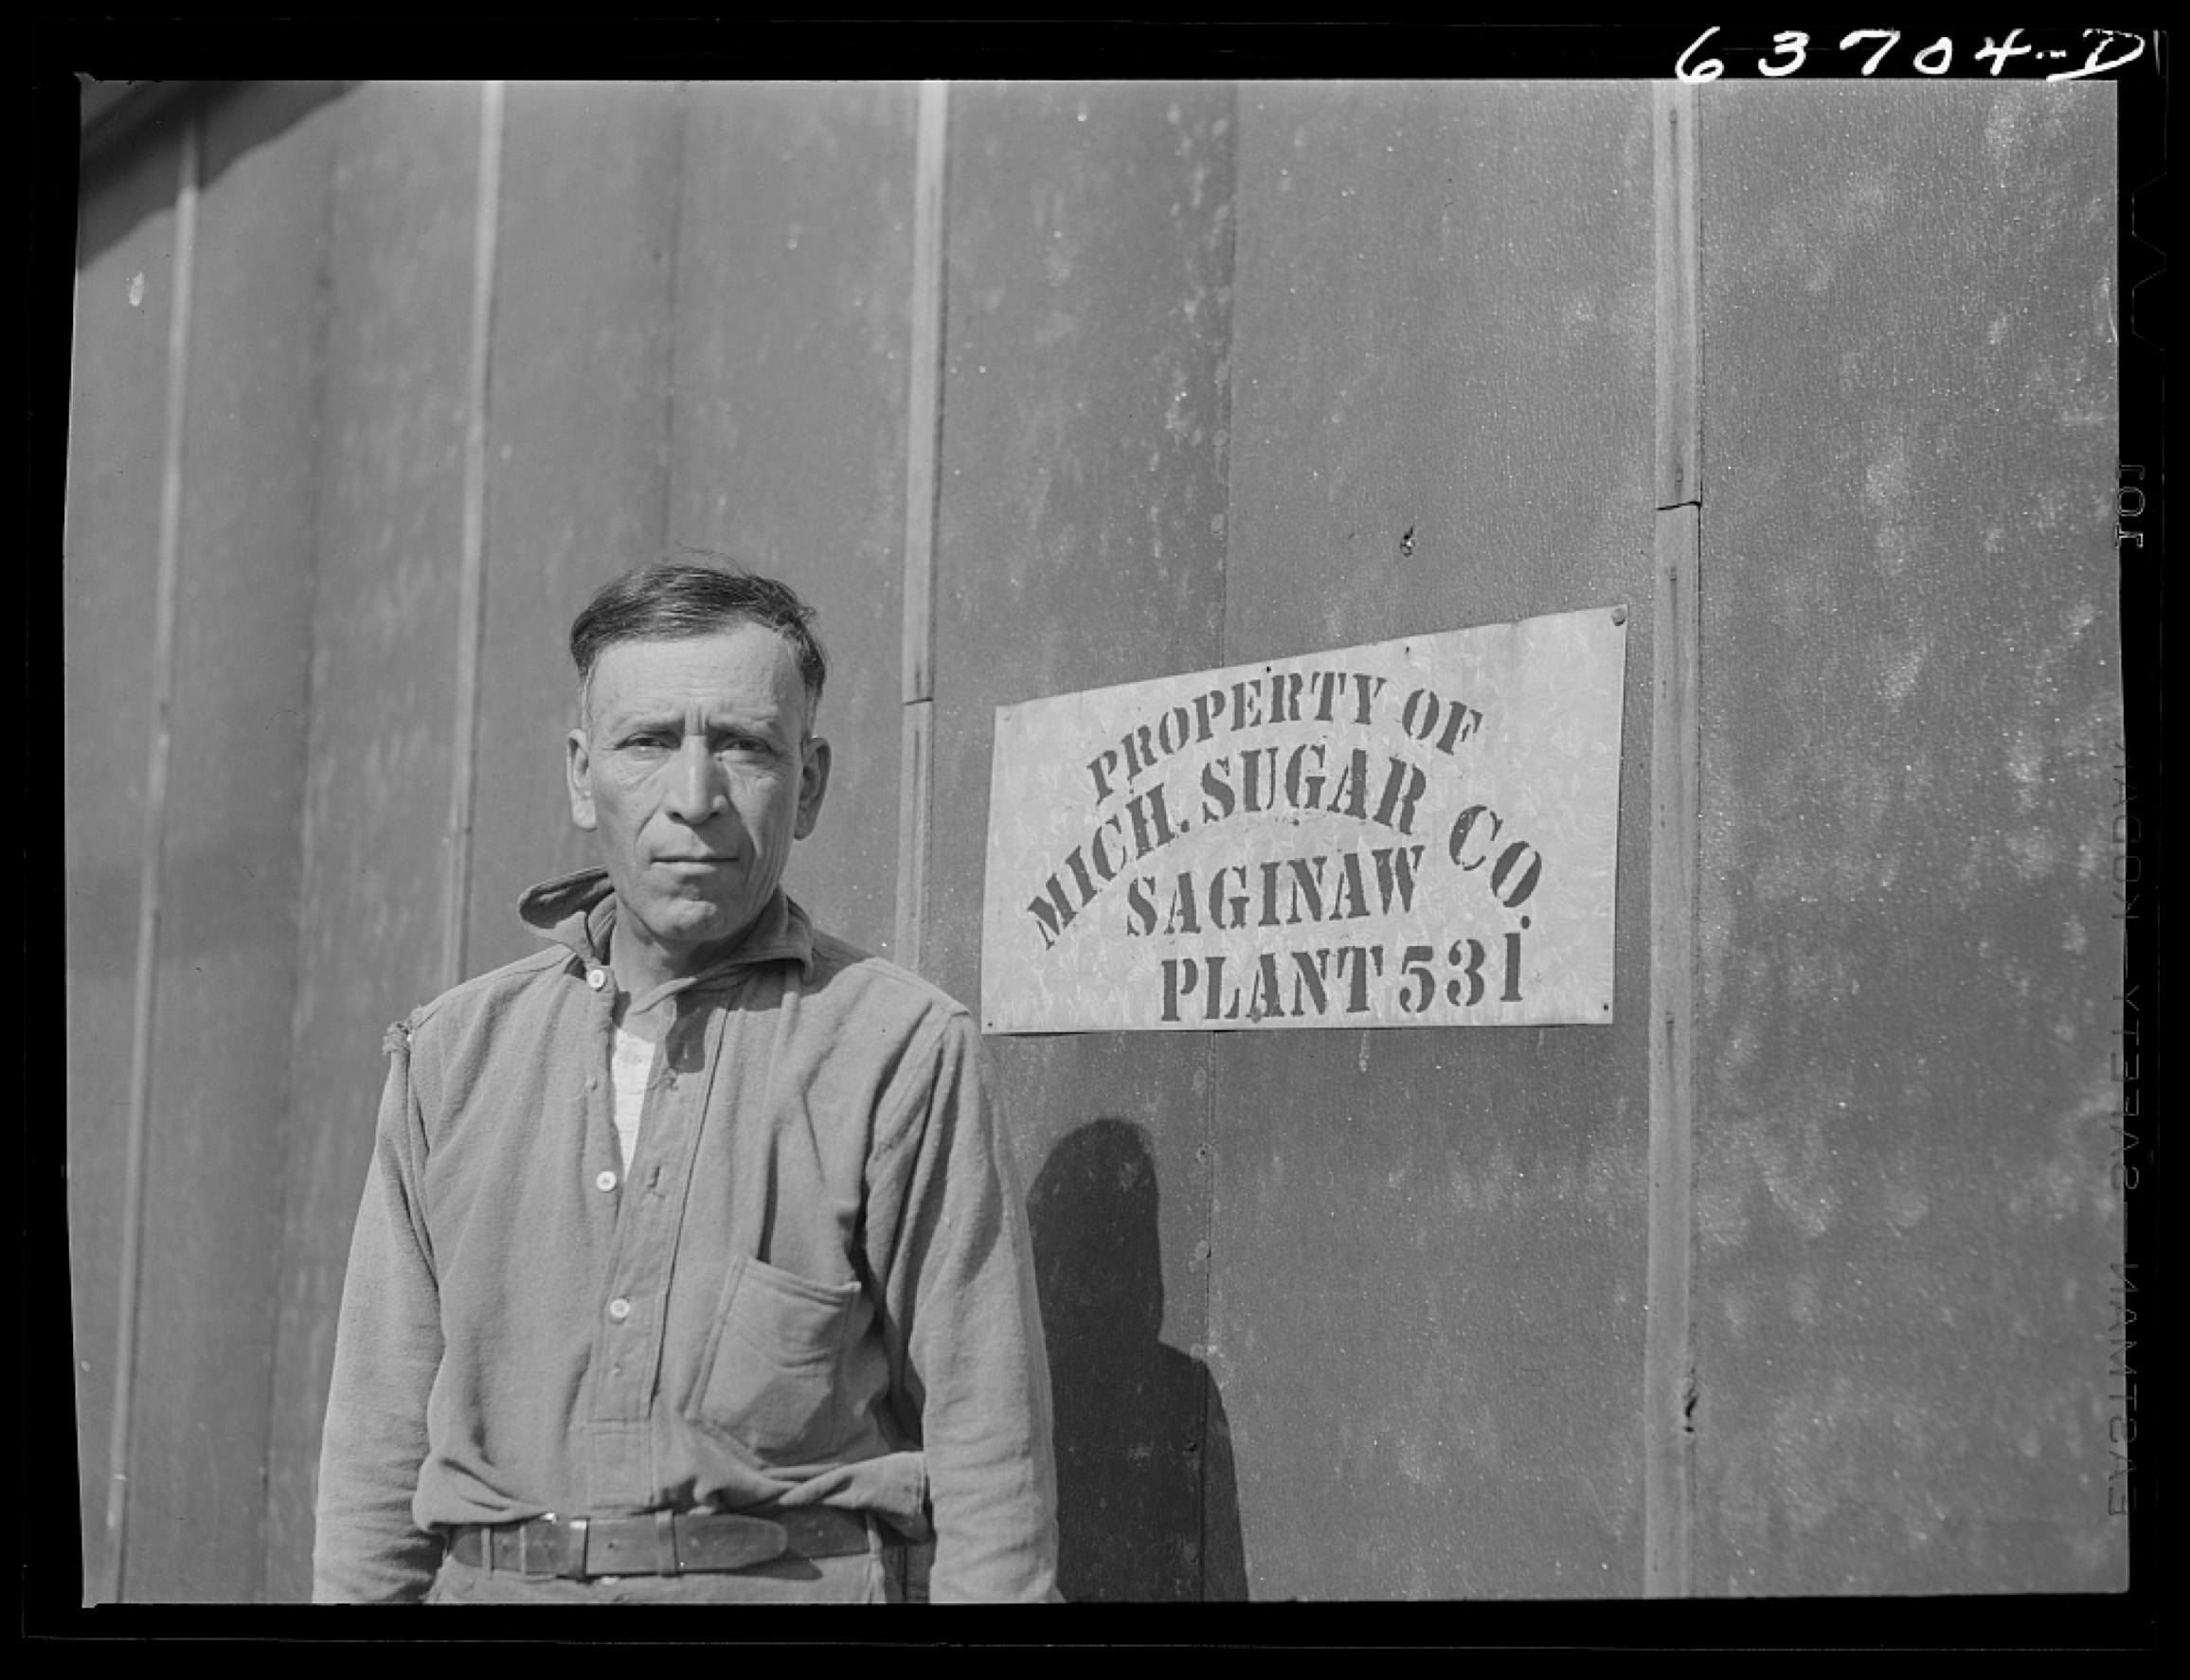 Sugar beet farmworker in Saginaw County. Photo accessed through the Library of Congress 